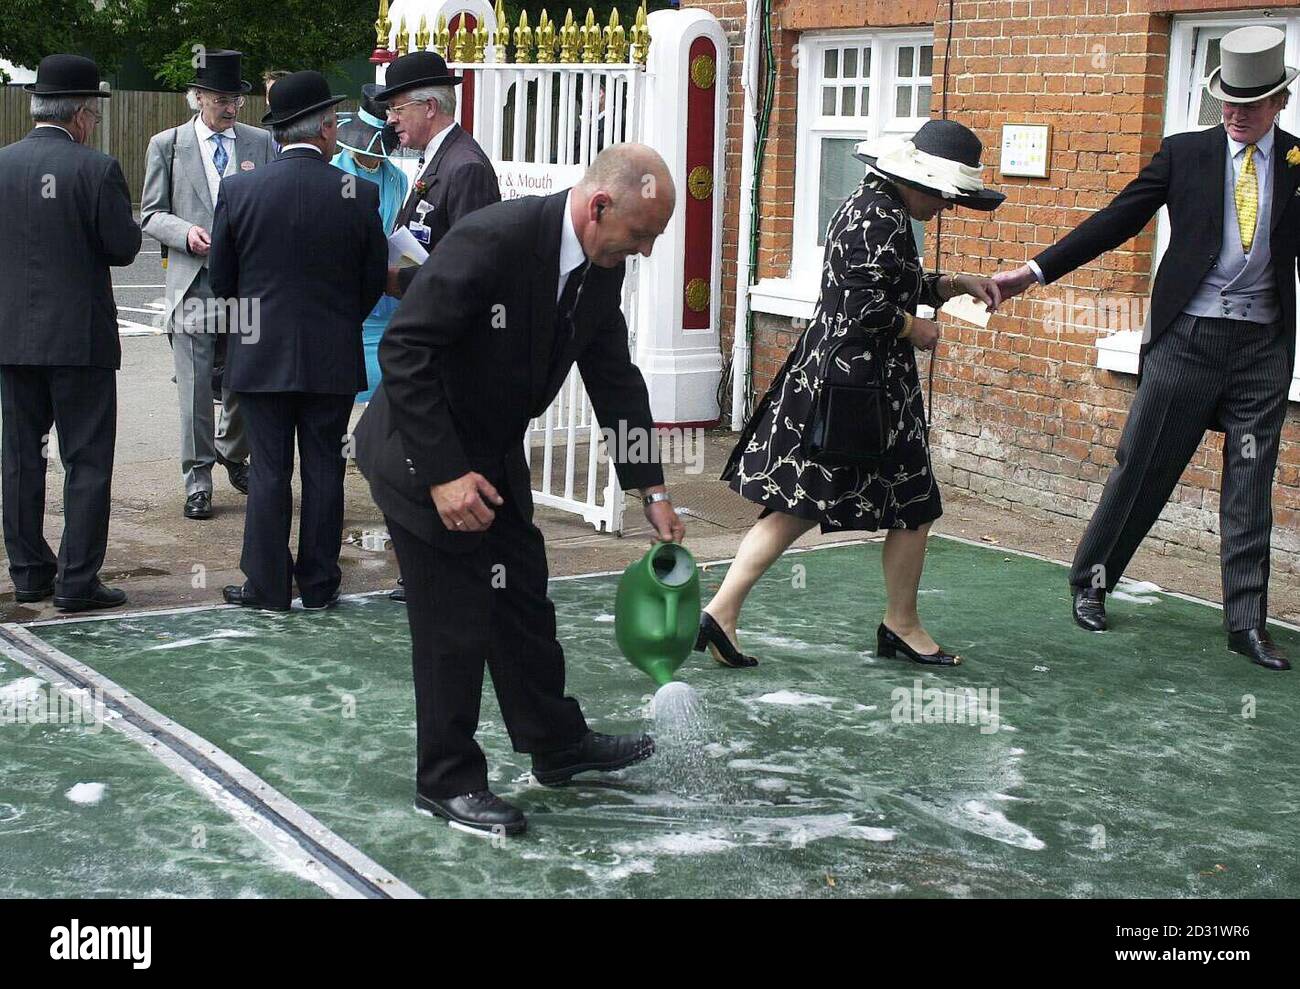 Race-goers arriving at Ascot walking over disinfected mats taking precautions for the ongoing foot and mouth crisis. This is the opening day of four-day Royal Ascot meeting. Stock Photo